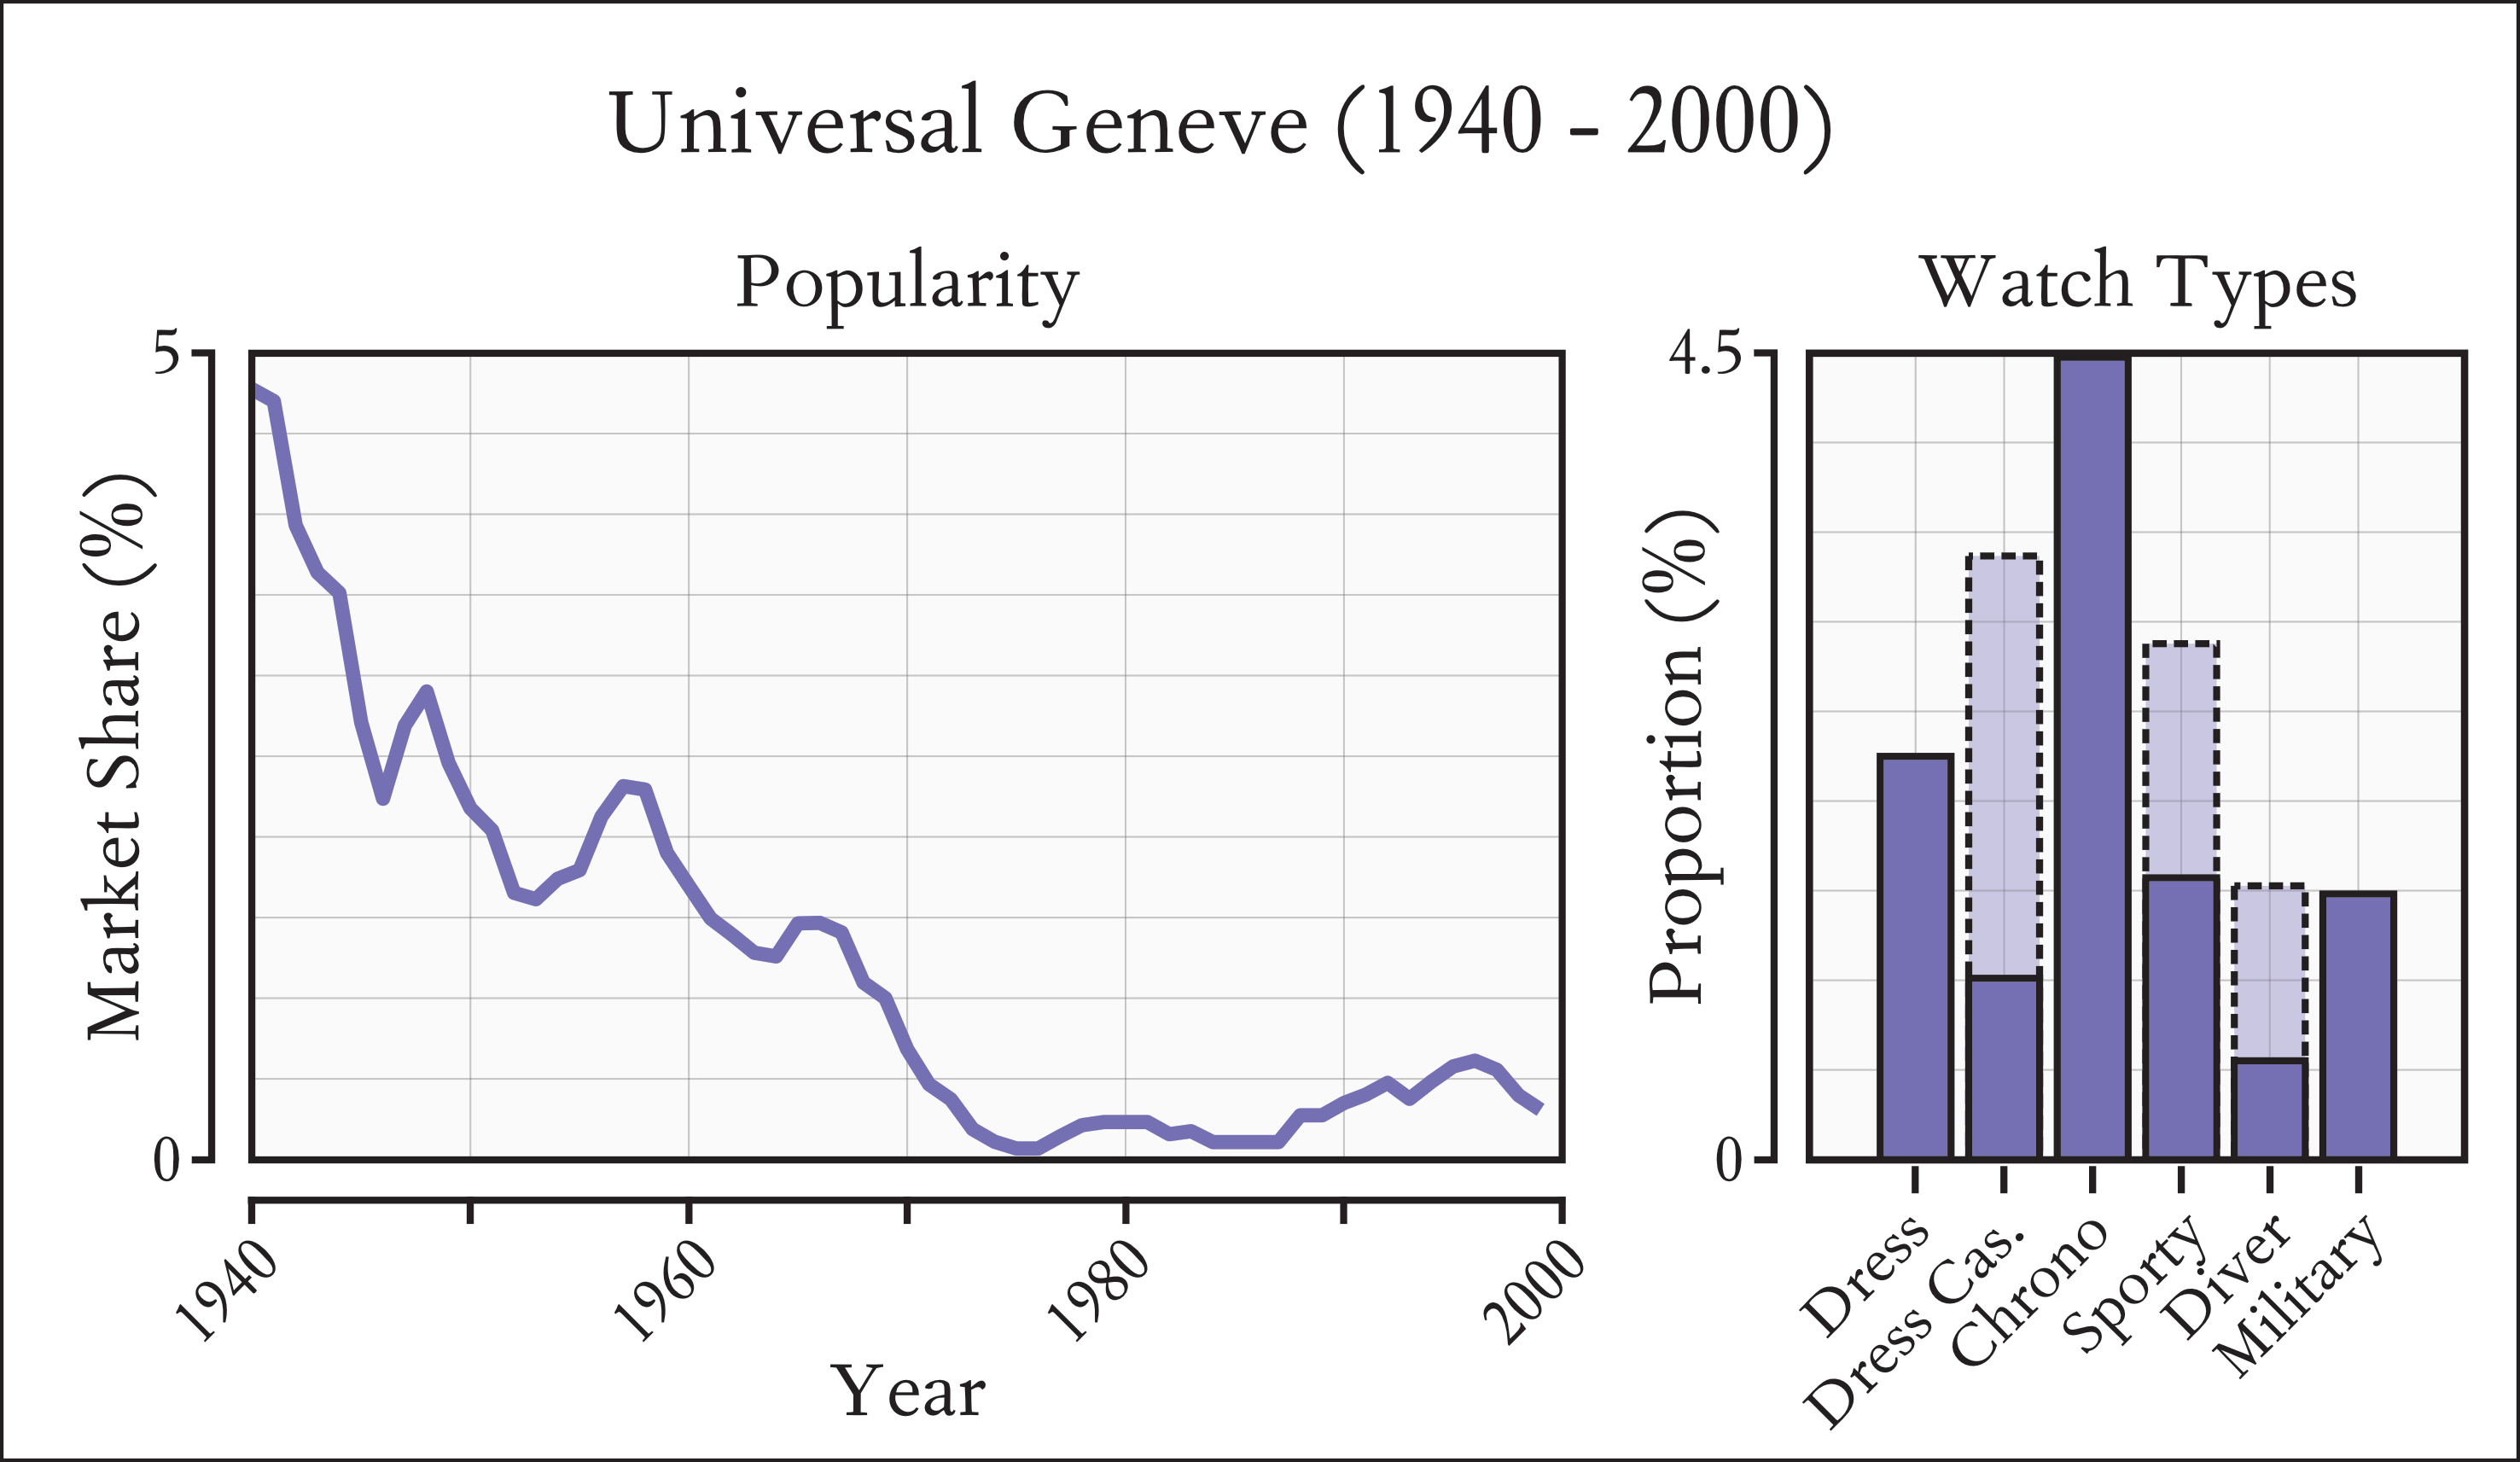 Distribution of Universal Geneve watches from 1940 to 2000